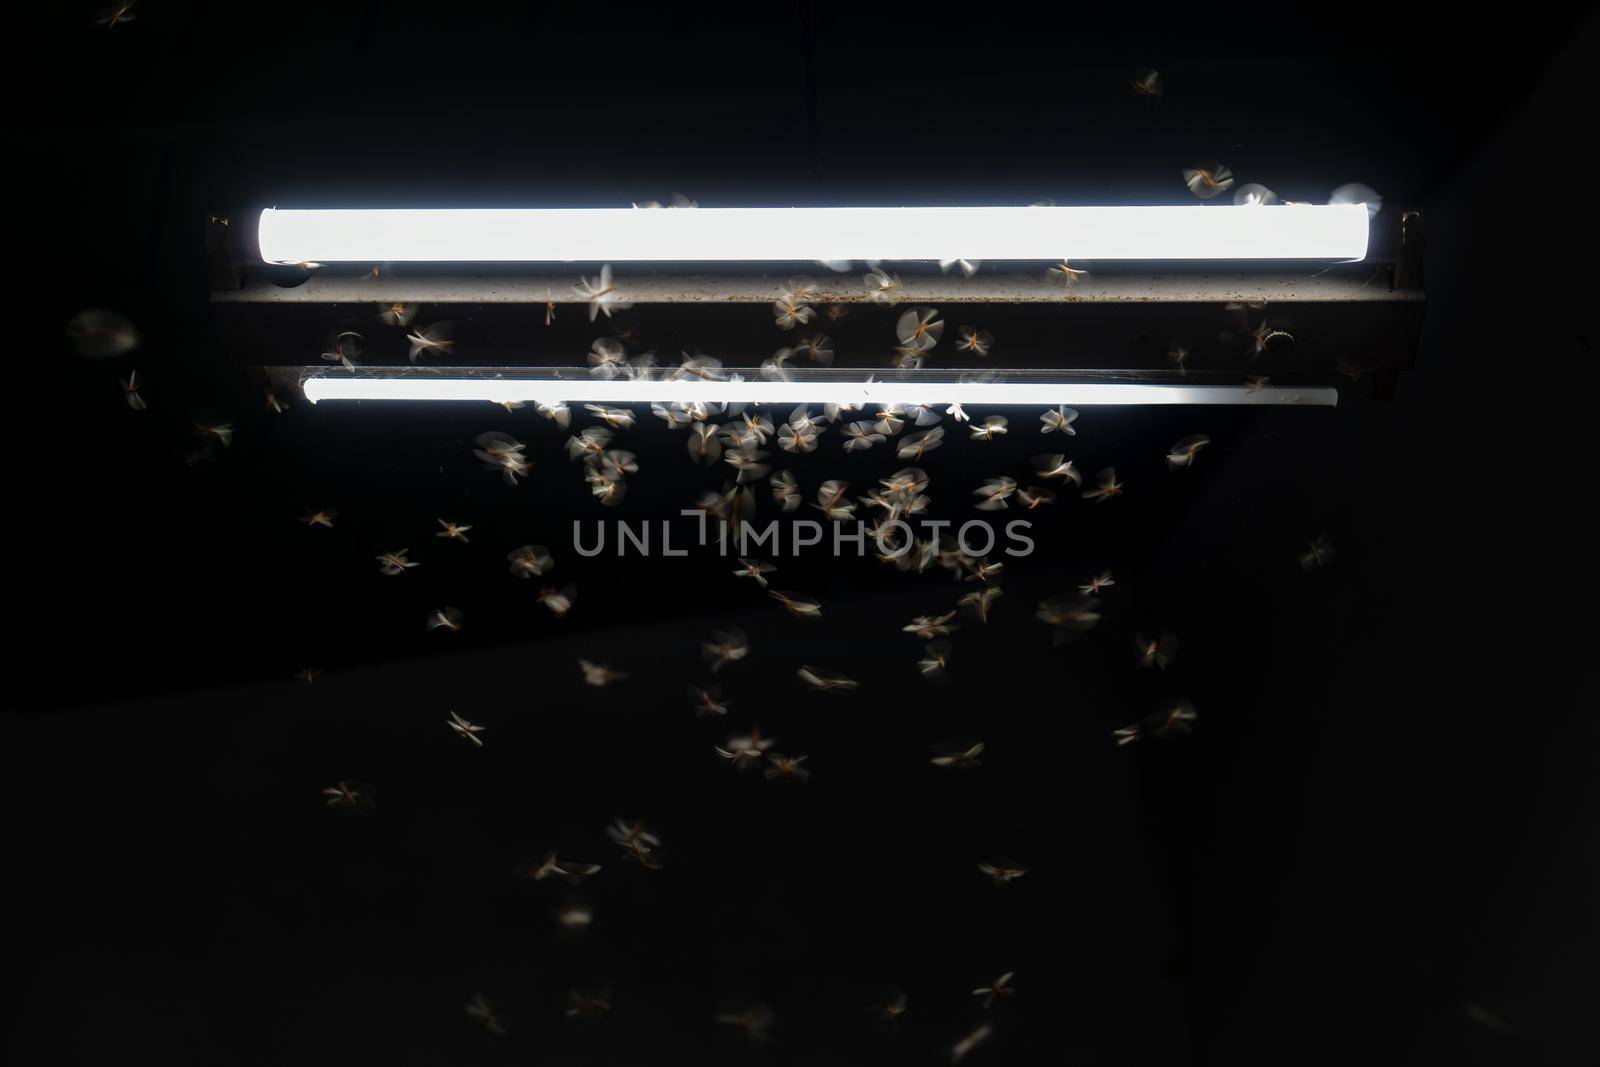 Termites flying around a light at night